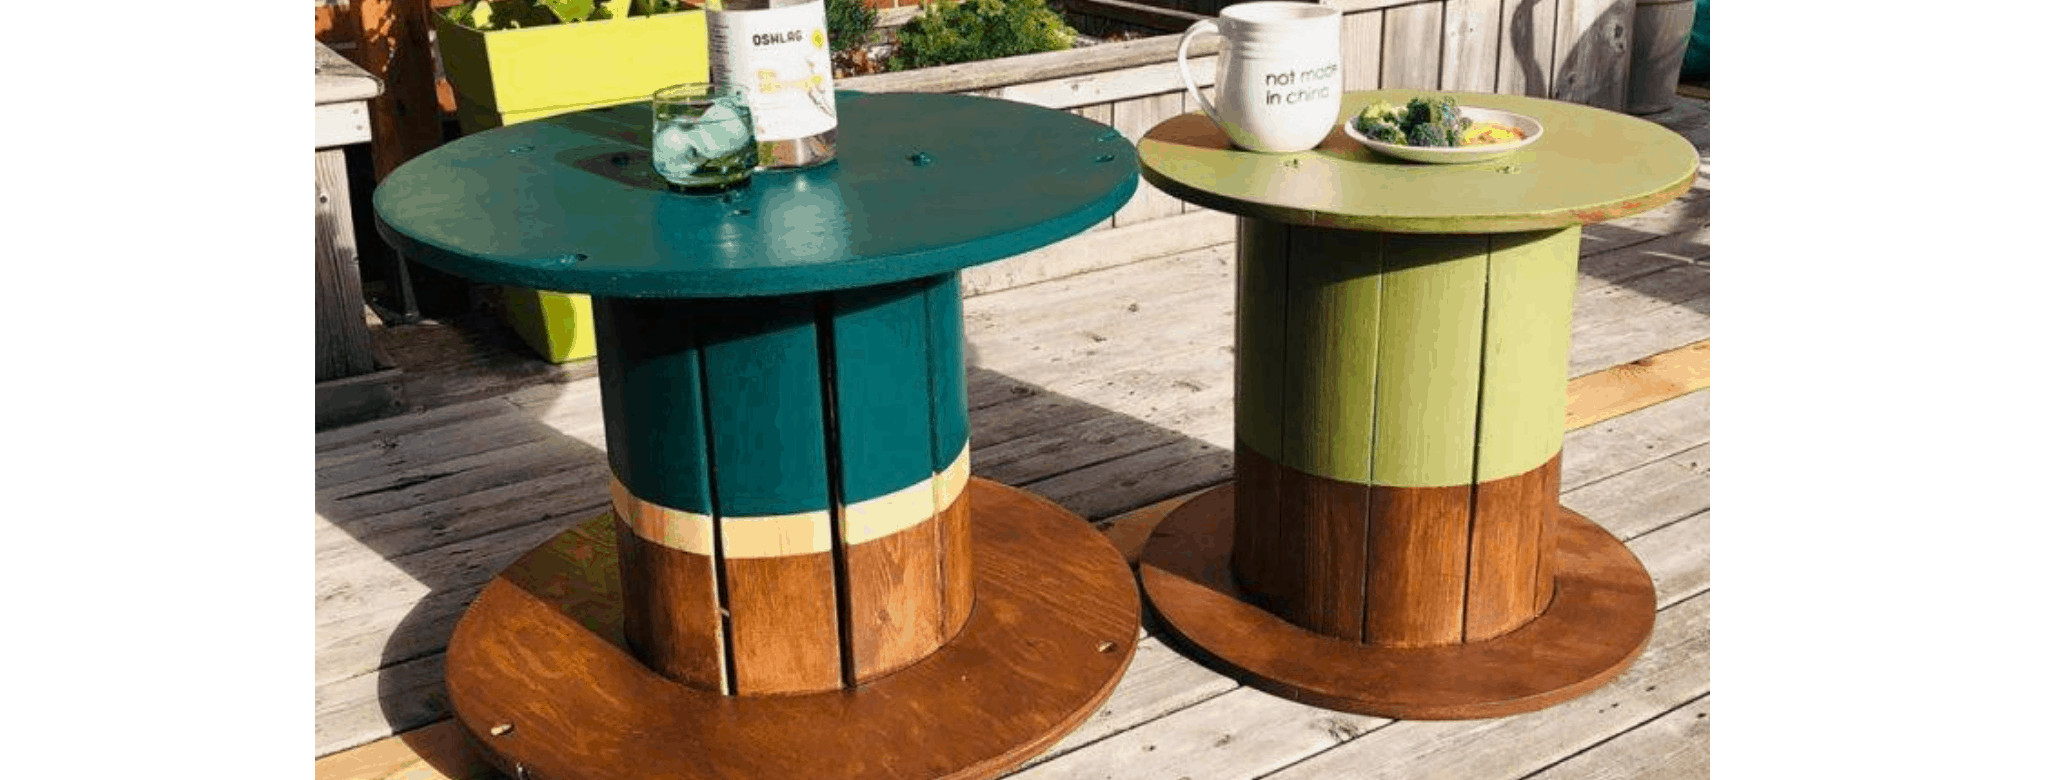 How to paint wood spools into patio side tables